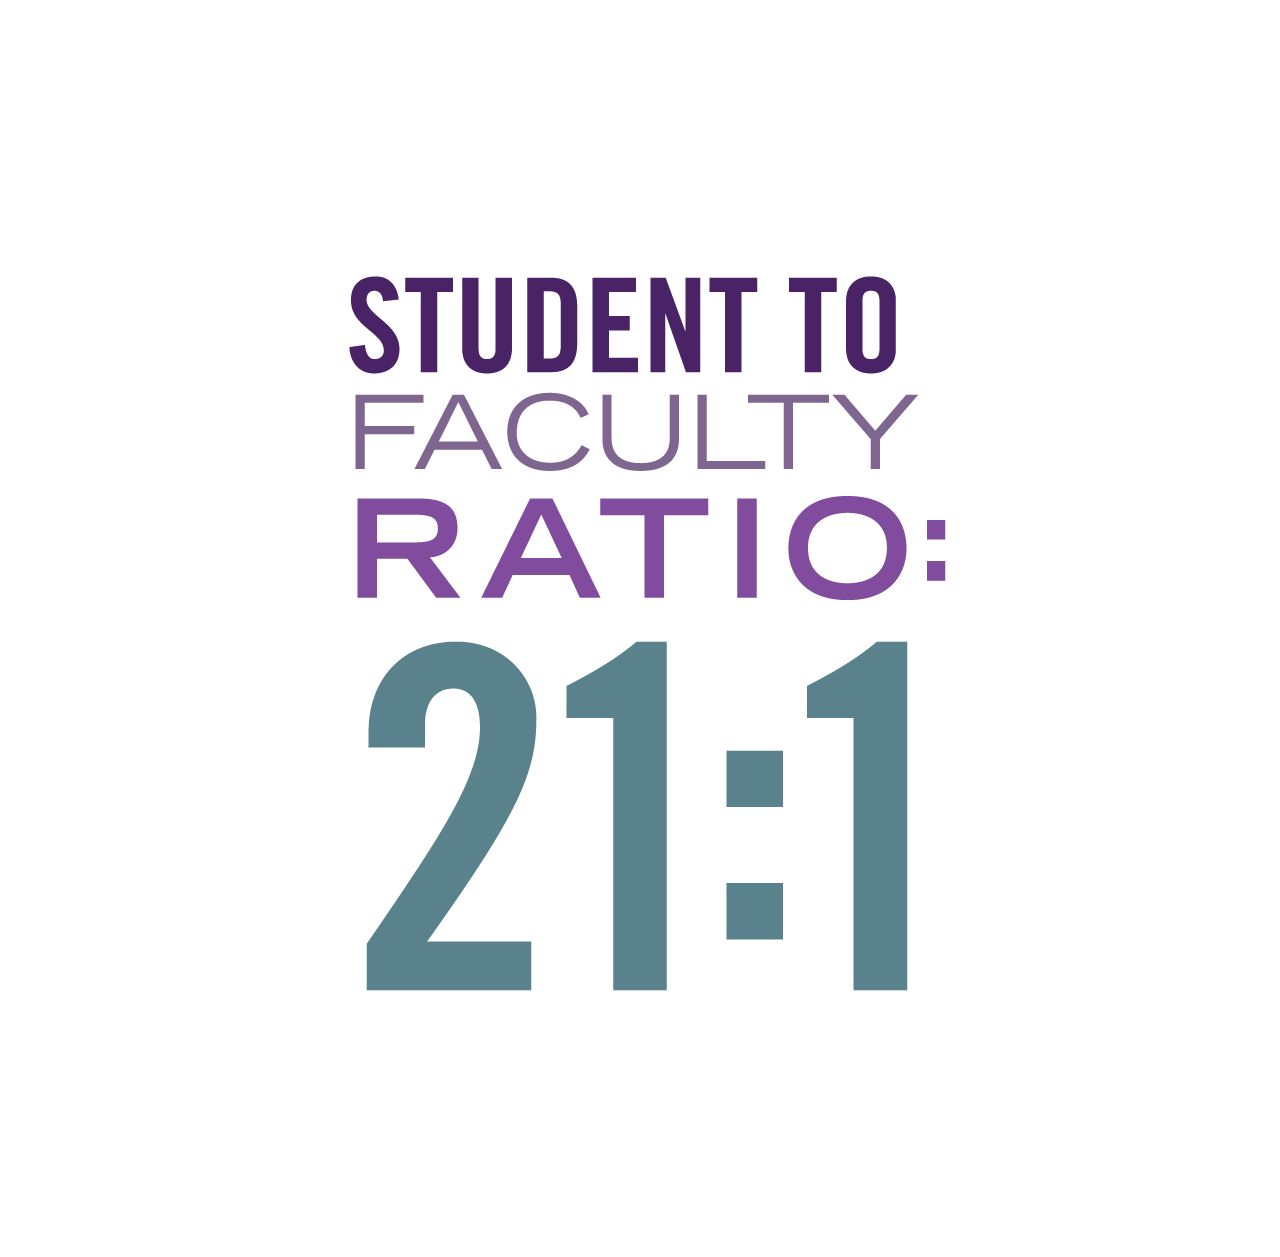 image text: student t0 faculty ratio is 21 to 1